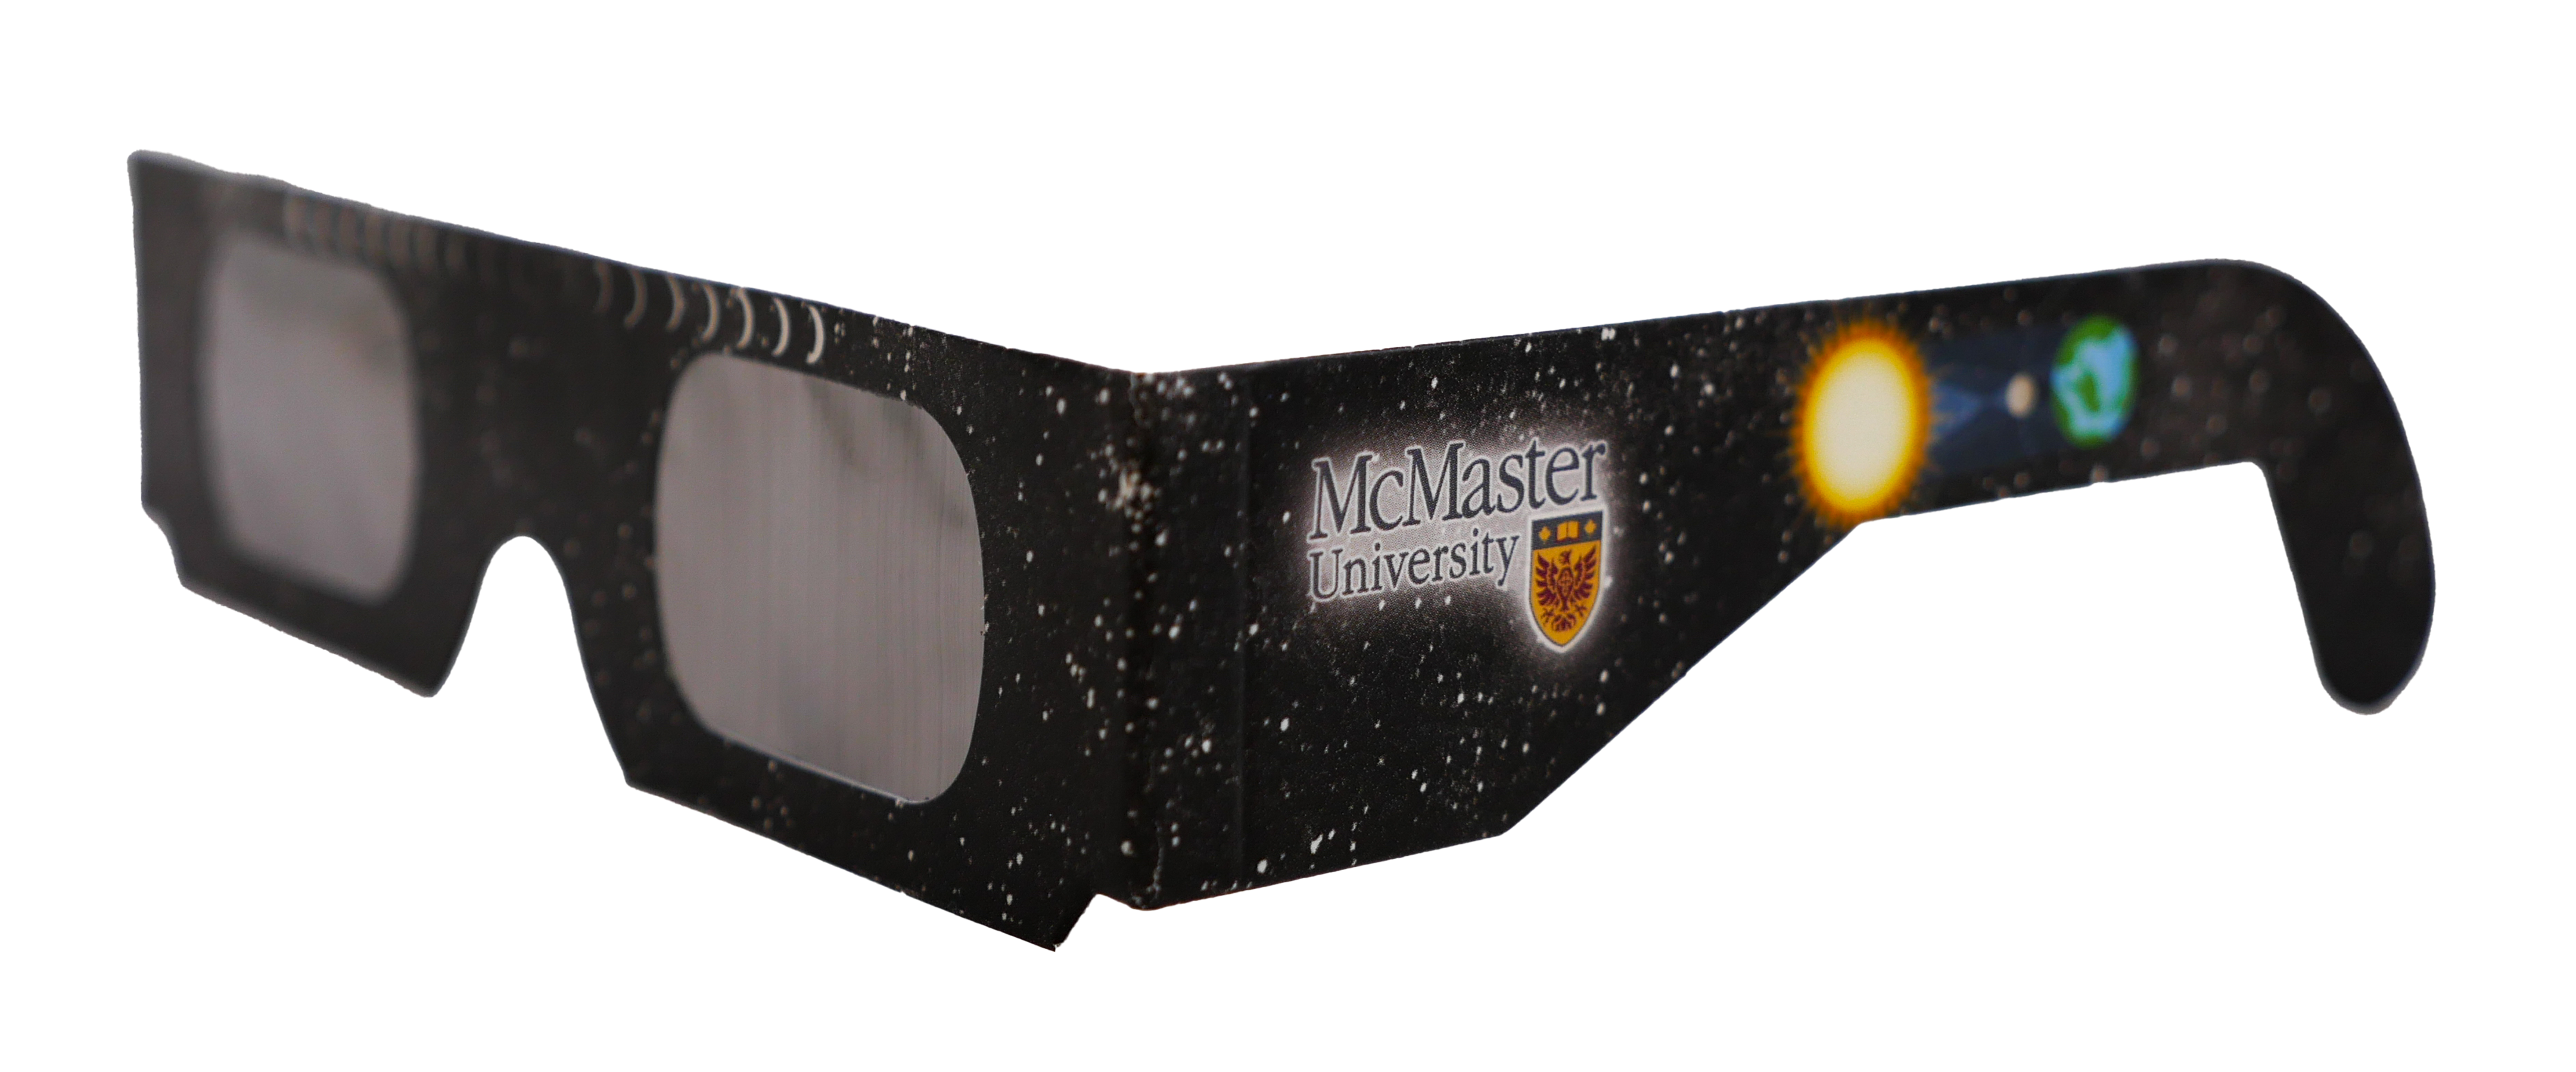 Solar eclipse glasses with an illustration of the moon getting between the earth and sun, as well as the McMaster University logo.